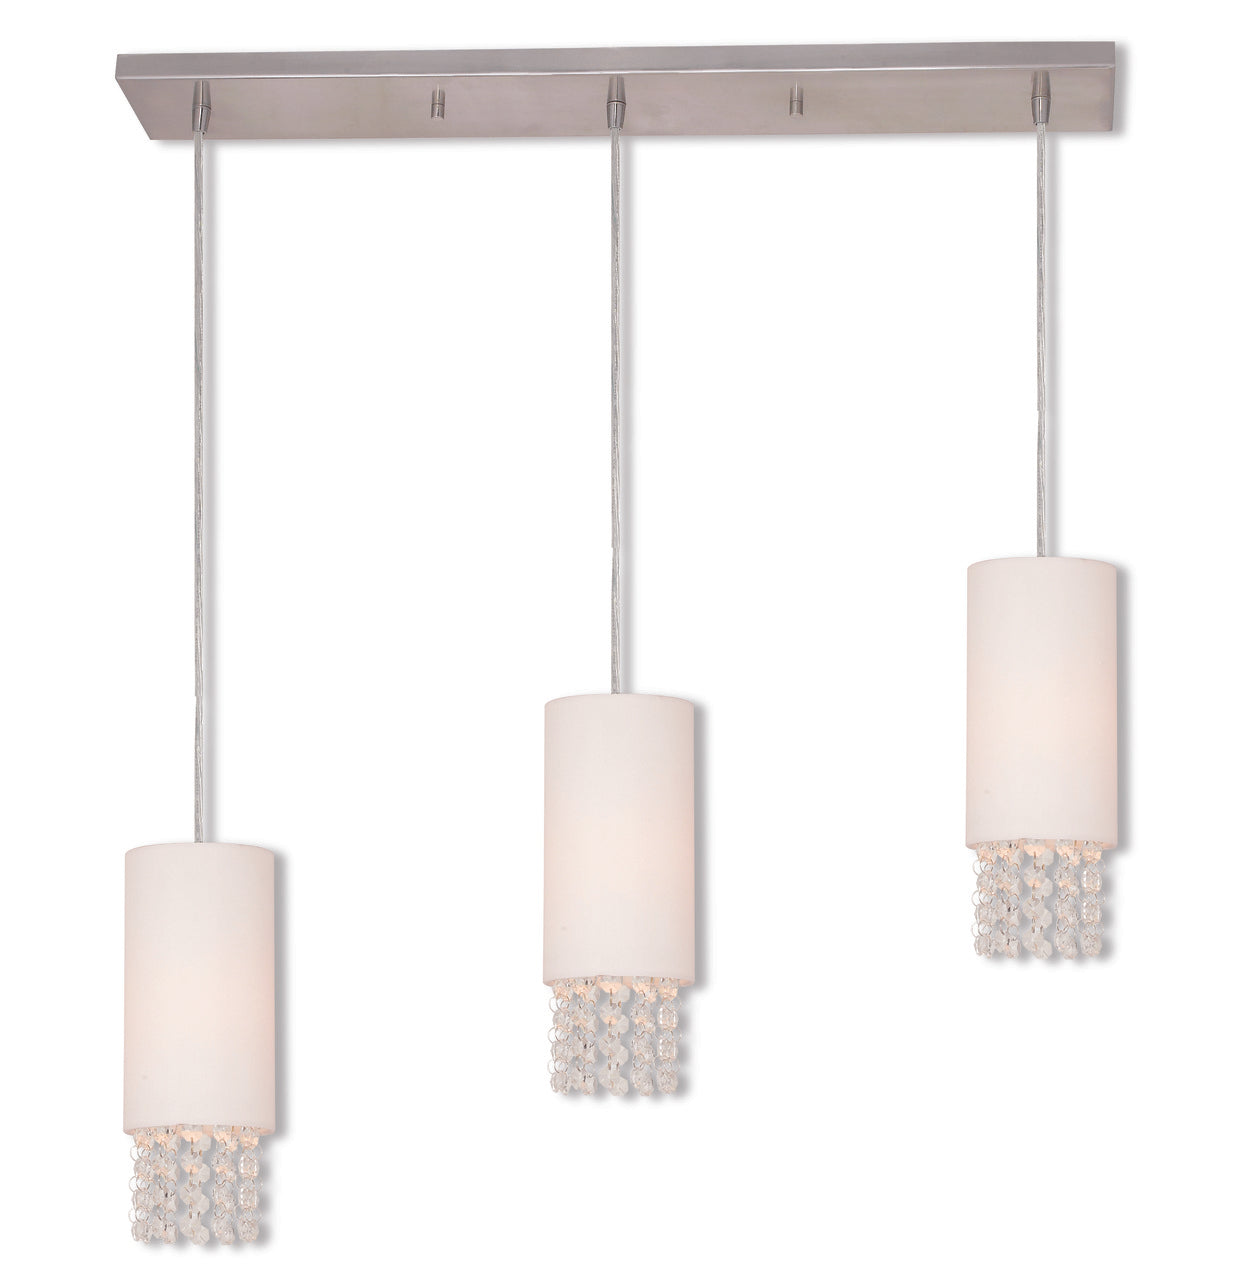 LIVEX Lighting 51023-91 Carlisle Contemporary Linear Chandelier in Brushed Nickel (3 Light)